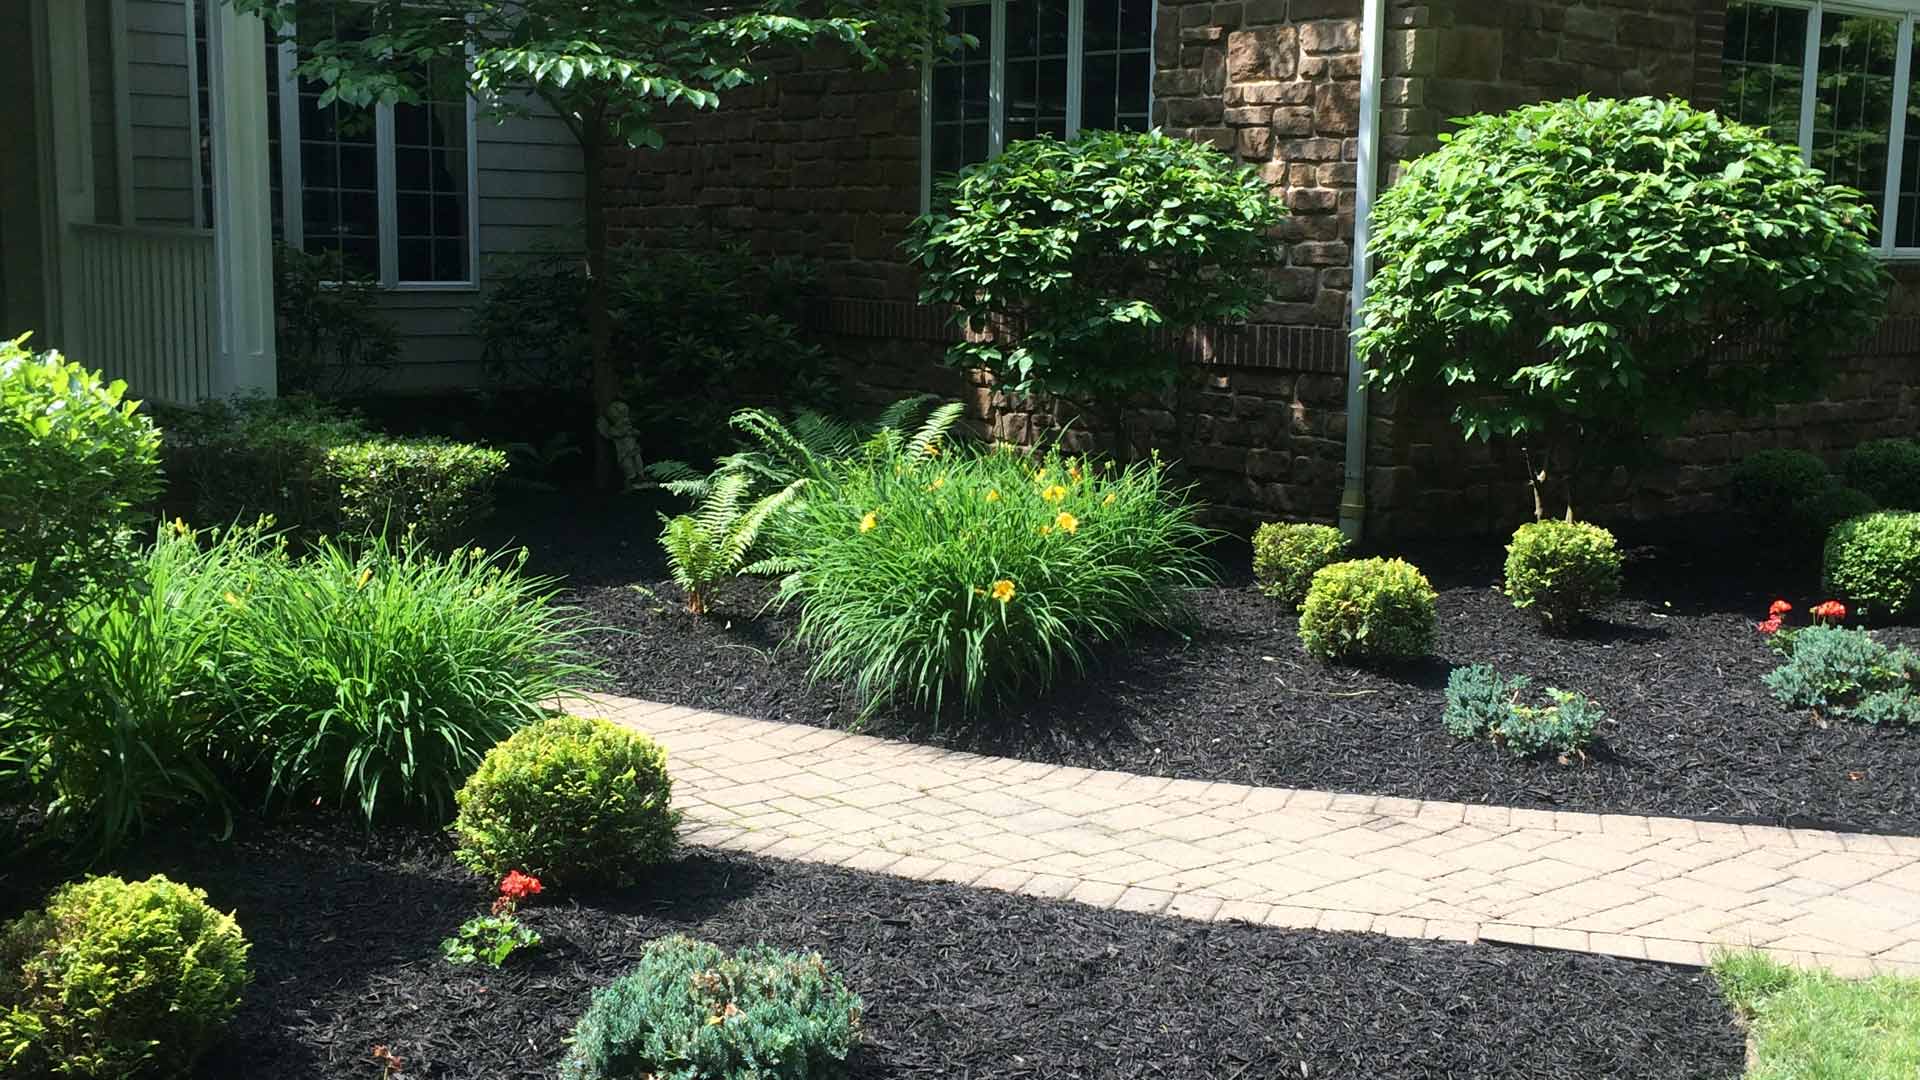 A home with a landscape bed maintained by professionals in Concord, OH.